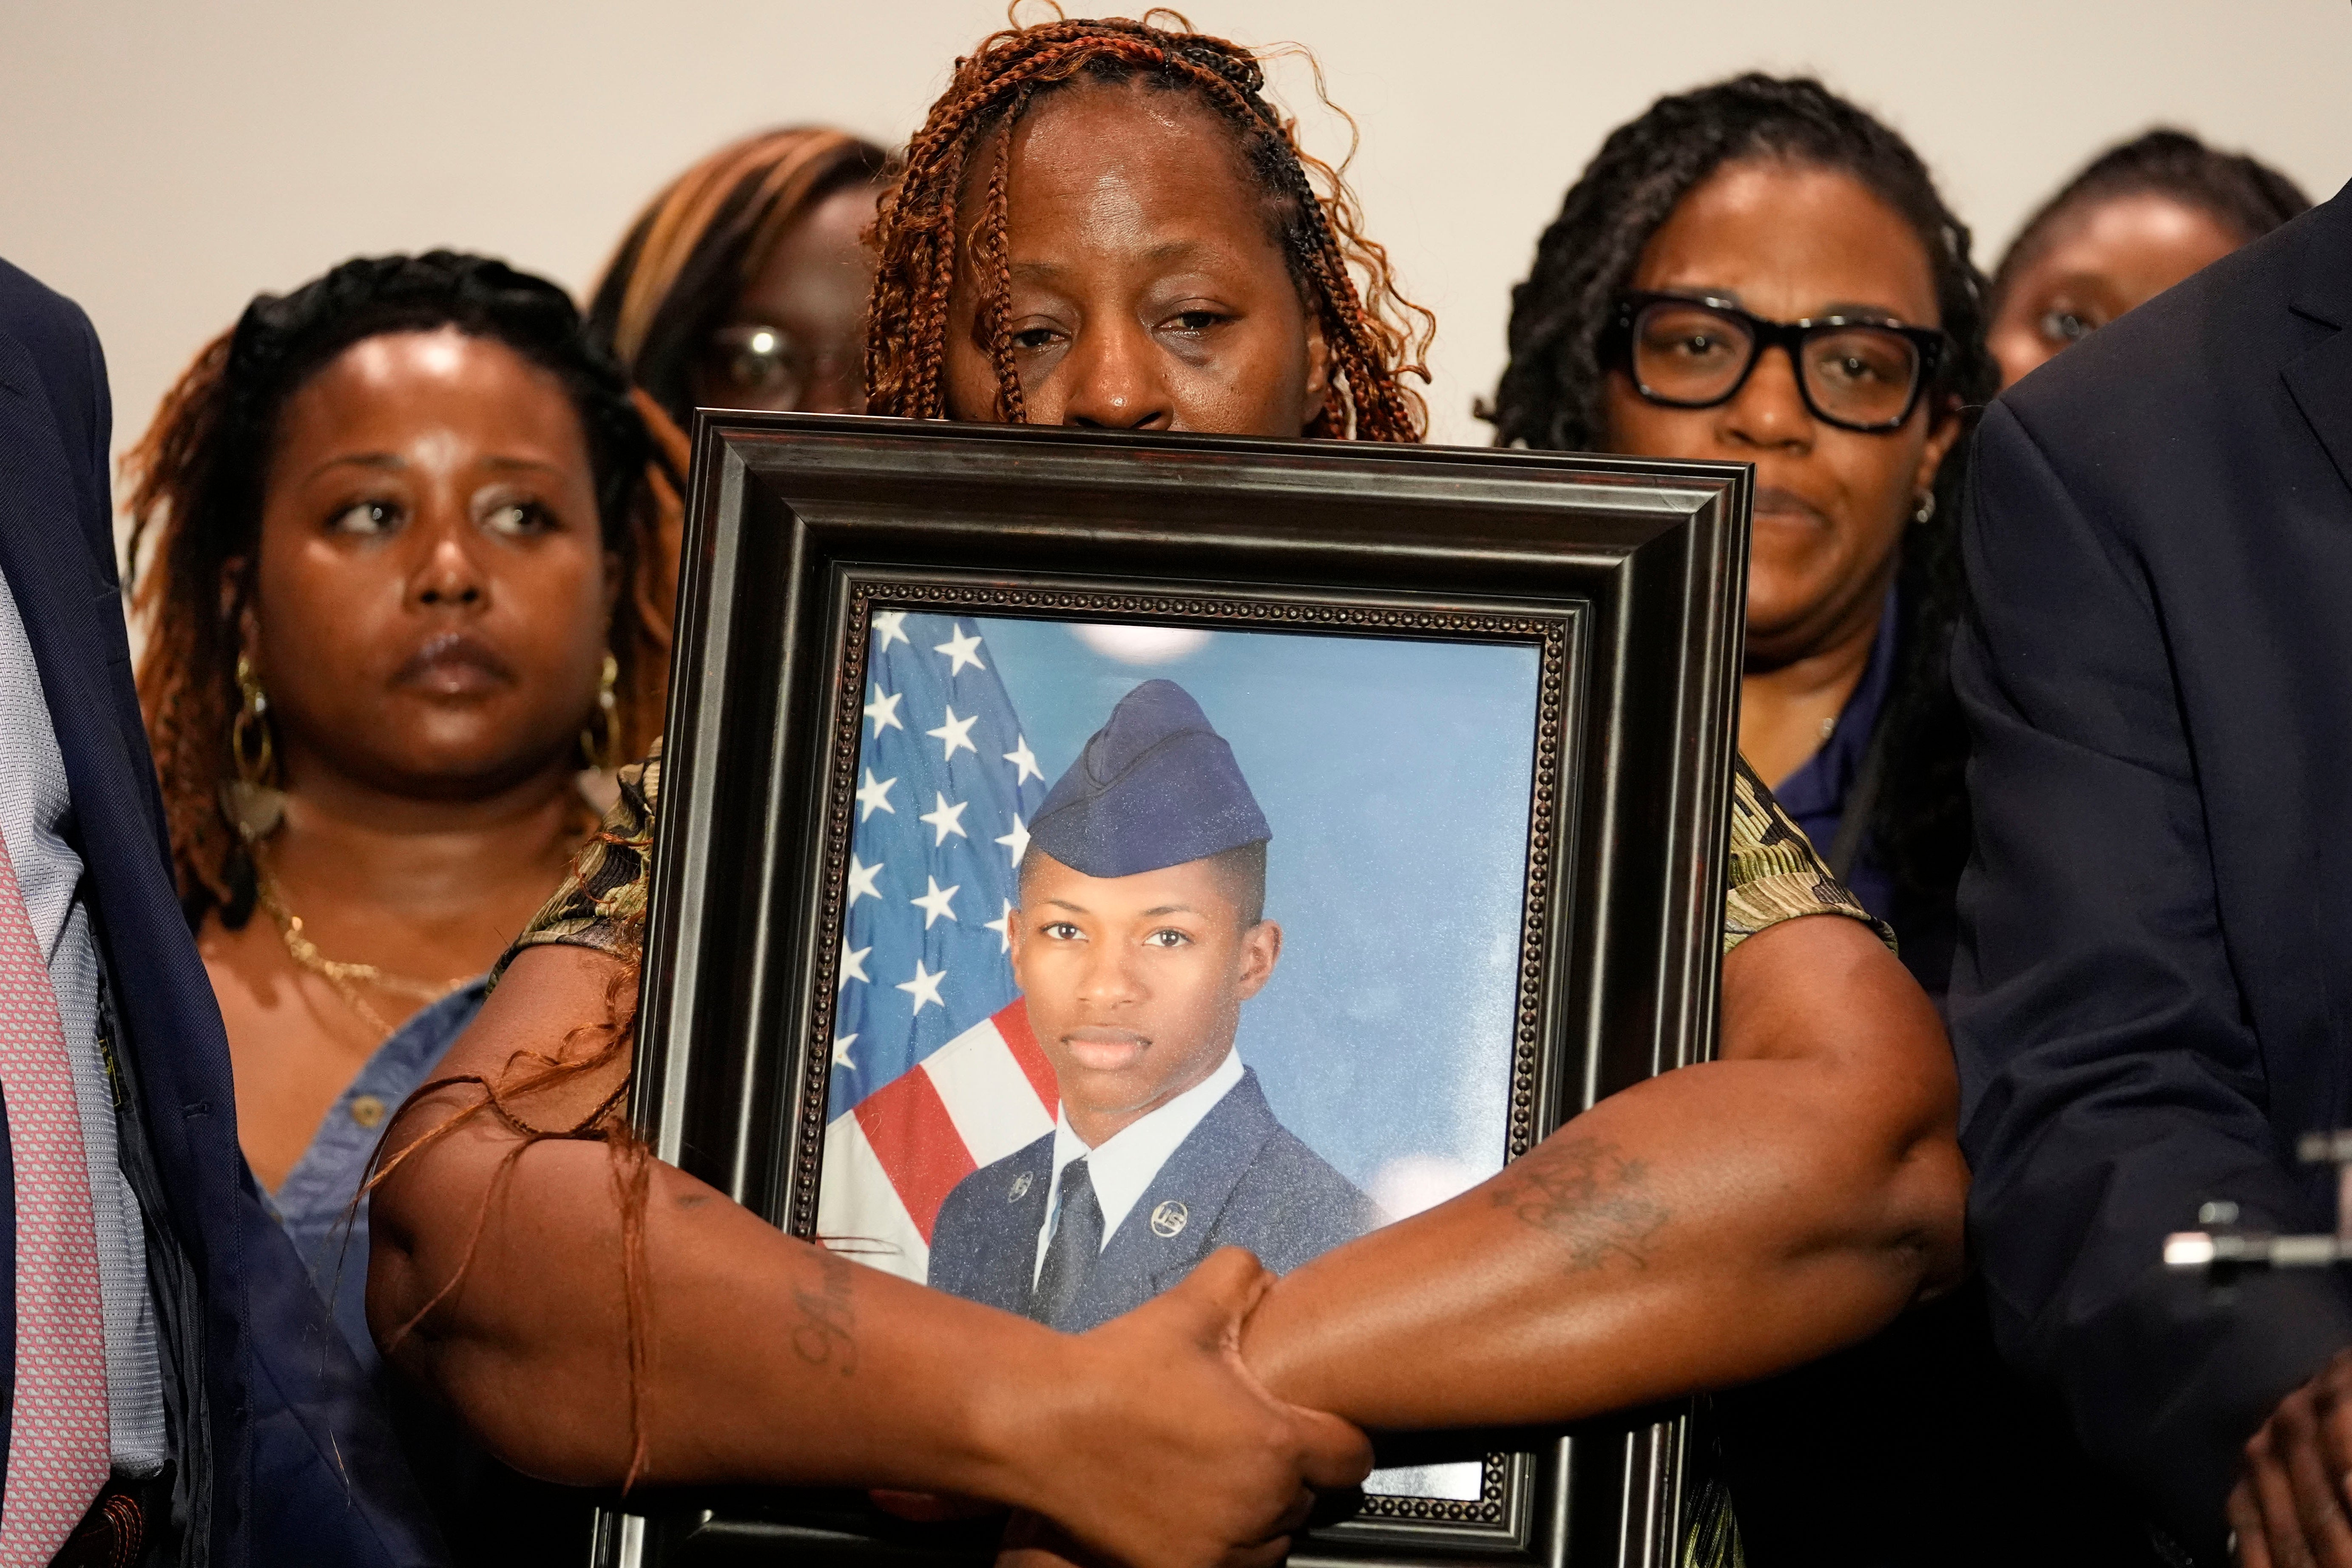 Chantemekki Fortson, mother of Roger Fortson, holds a photo of her son during a news conference